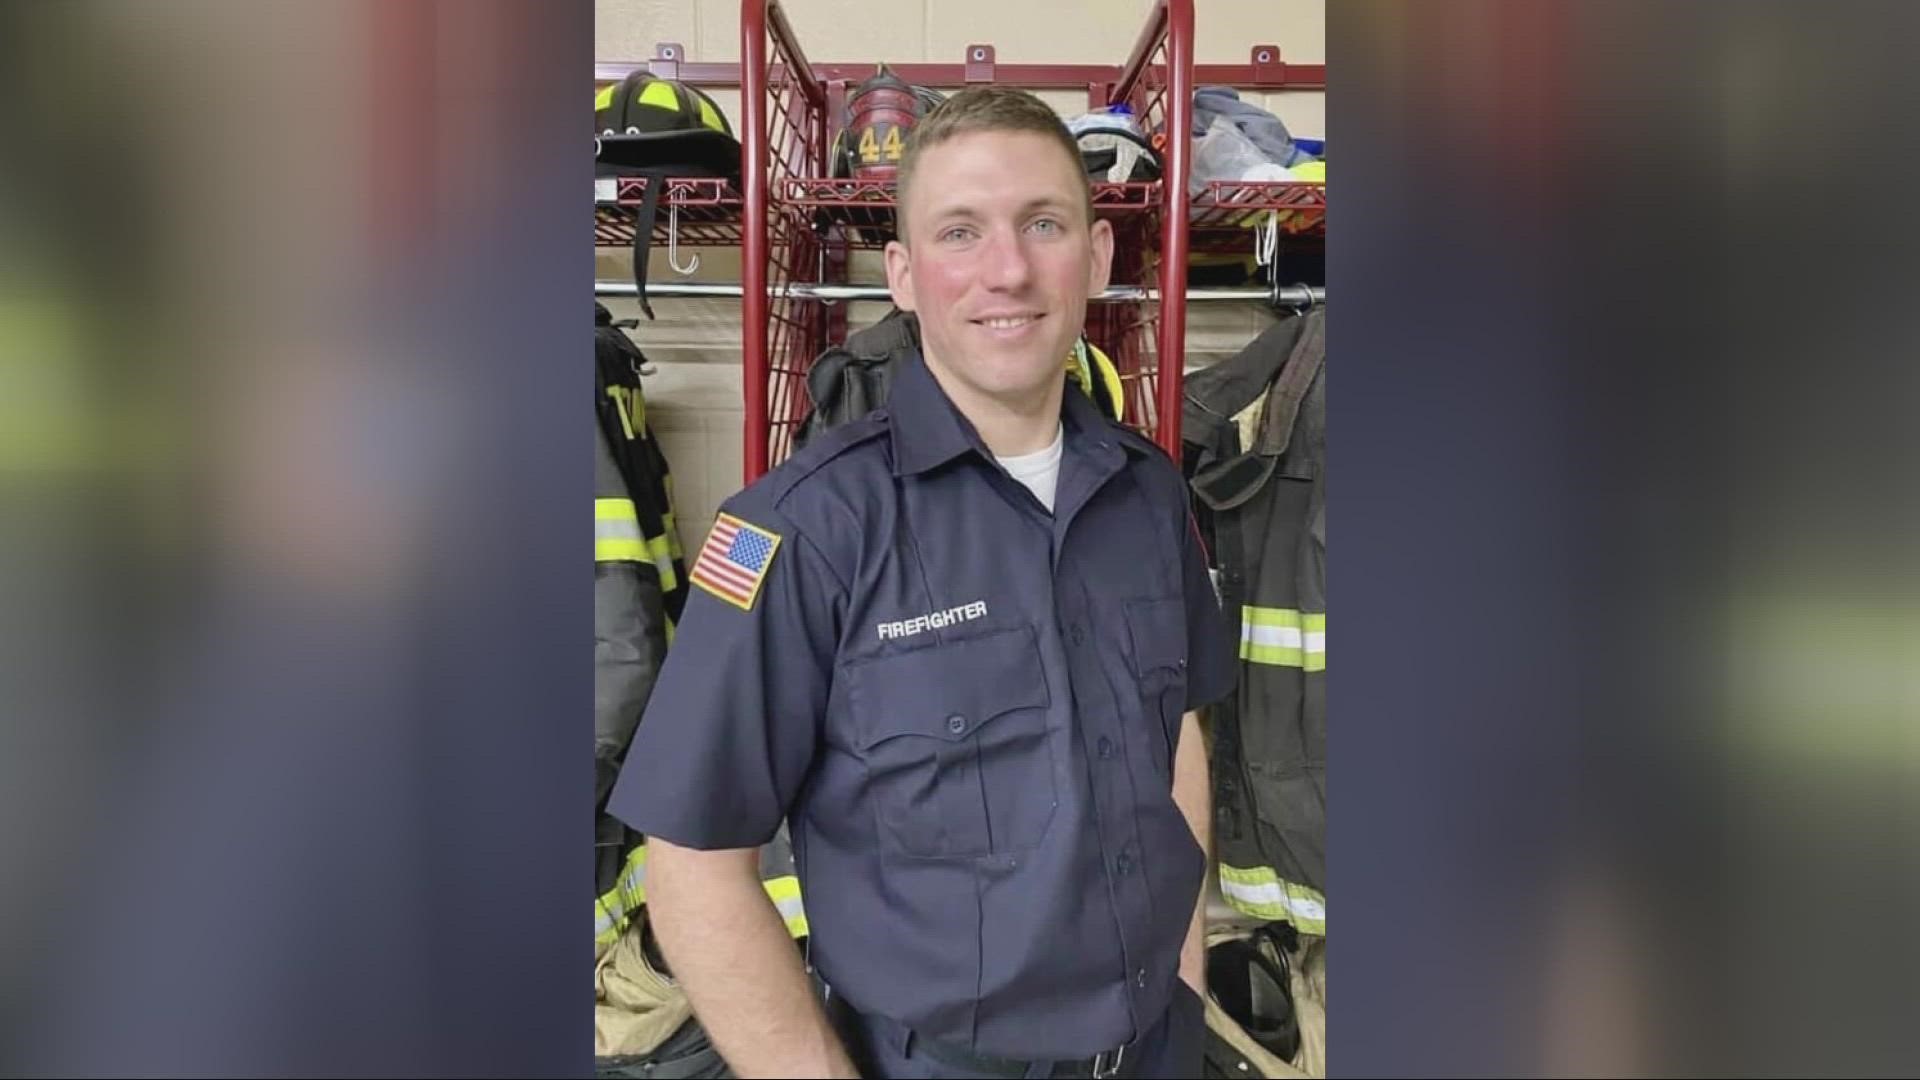 "A former US Marine, Joshua served on Thompson Fire for nearly 4 years and recently joined Montville Fire."